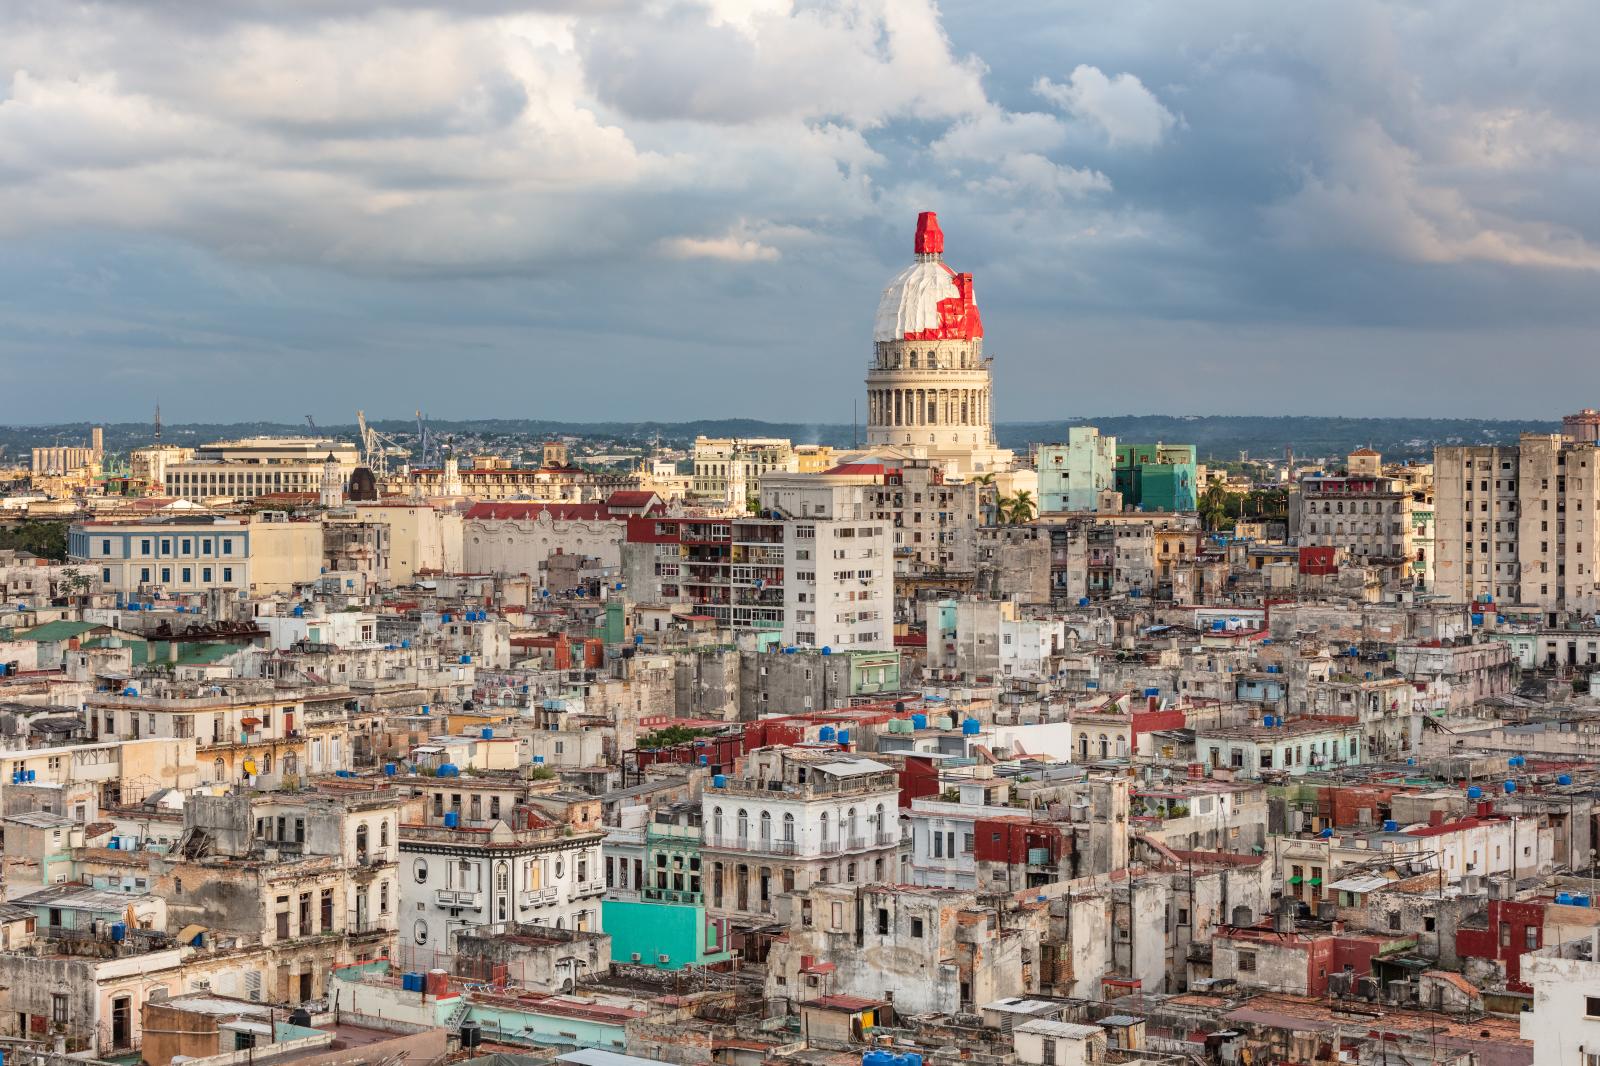 View of the Capital building and Old Havana